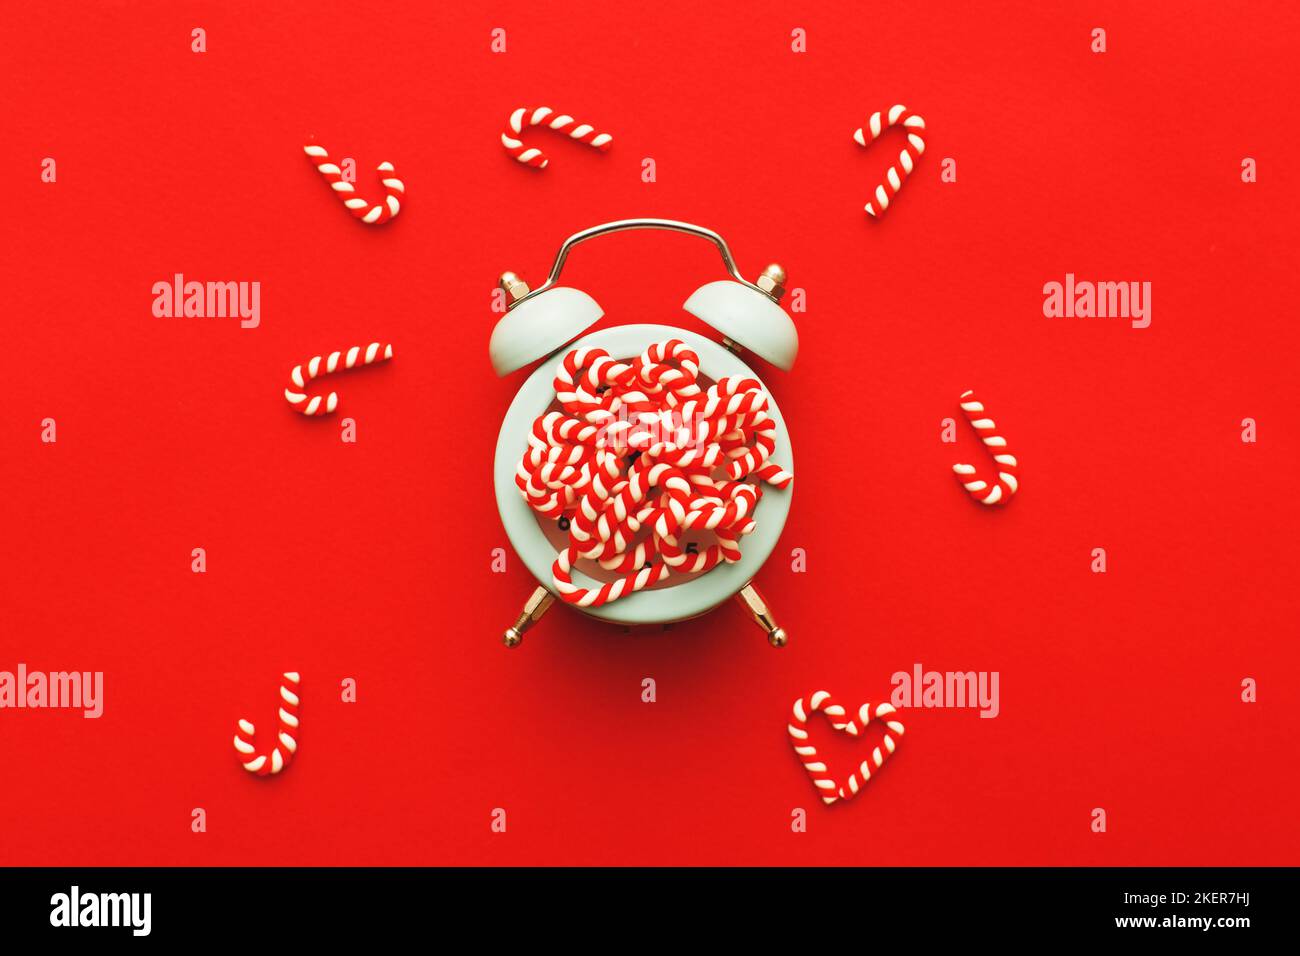 Christmas background with candy canes with the alarm clock on blue red background. Stock Photo